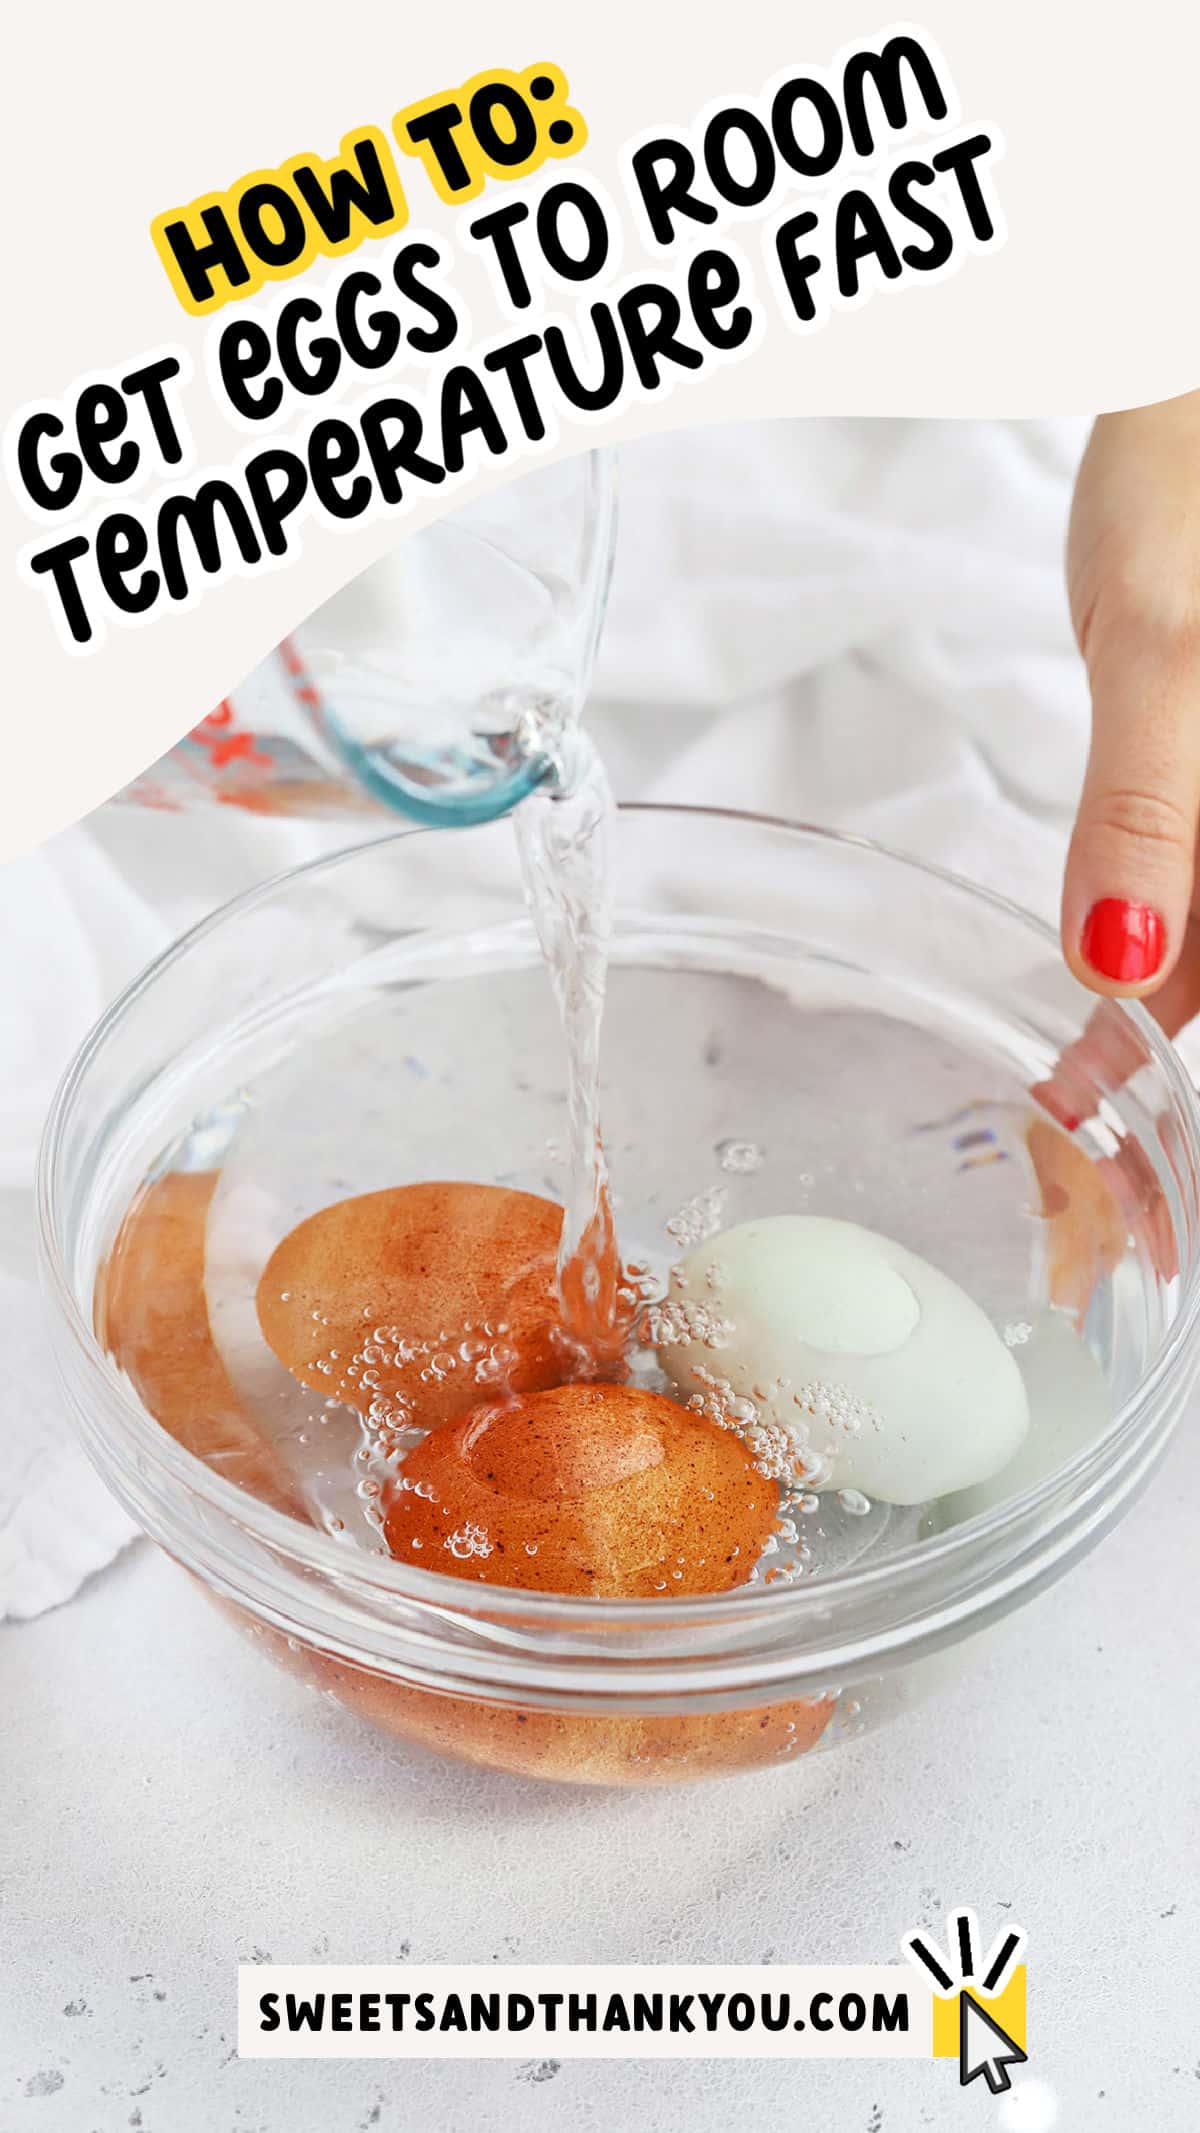 How To Get Eggs To Room Temperature Quickly - Learn the best trick for getting eggs to room temperature quickly & why room temperature eggs are important! From how long does it take eggs to get to room temperature to an easy water trick for bringing eggs to room temperature, we've got everything you need to know!